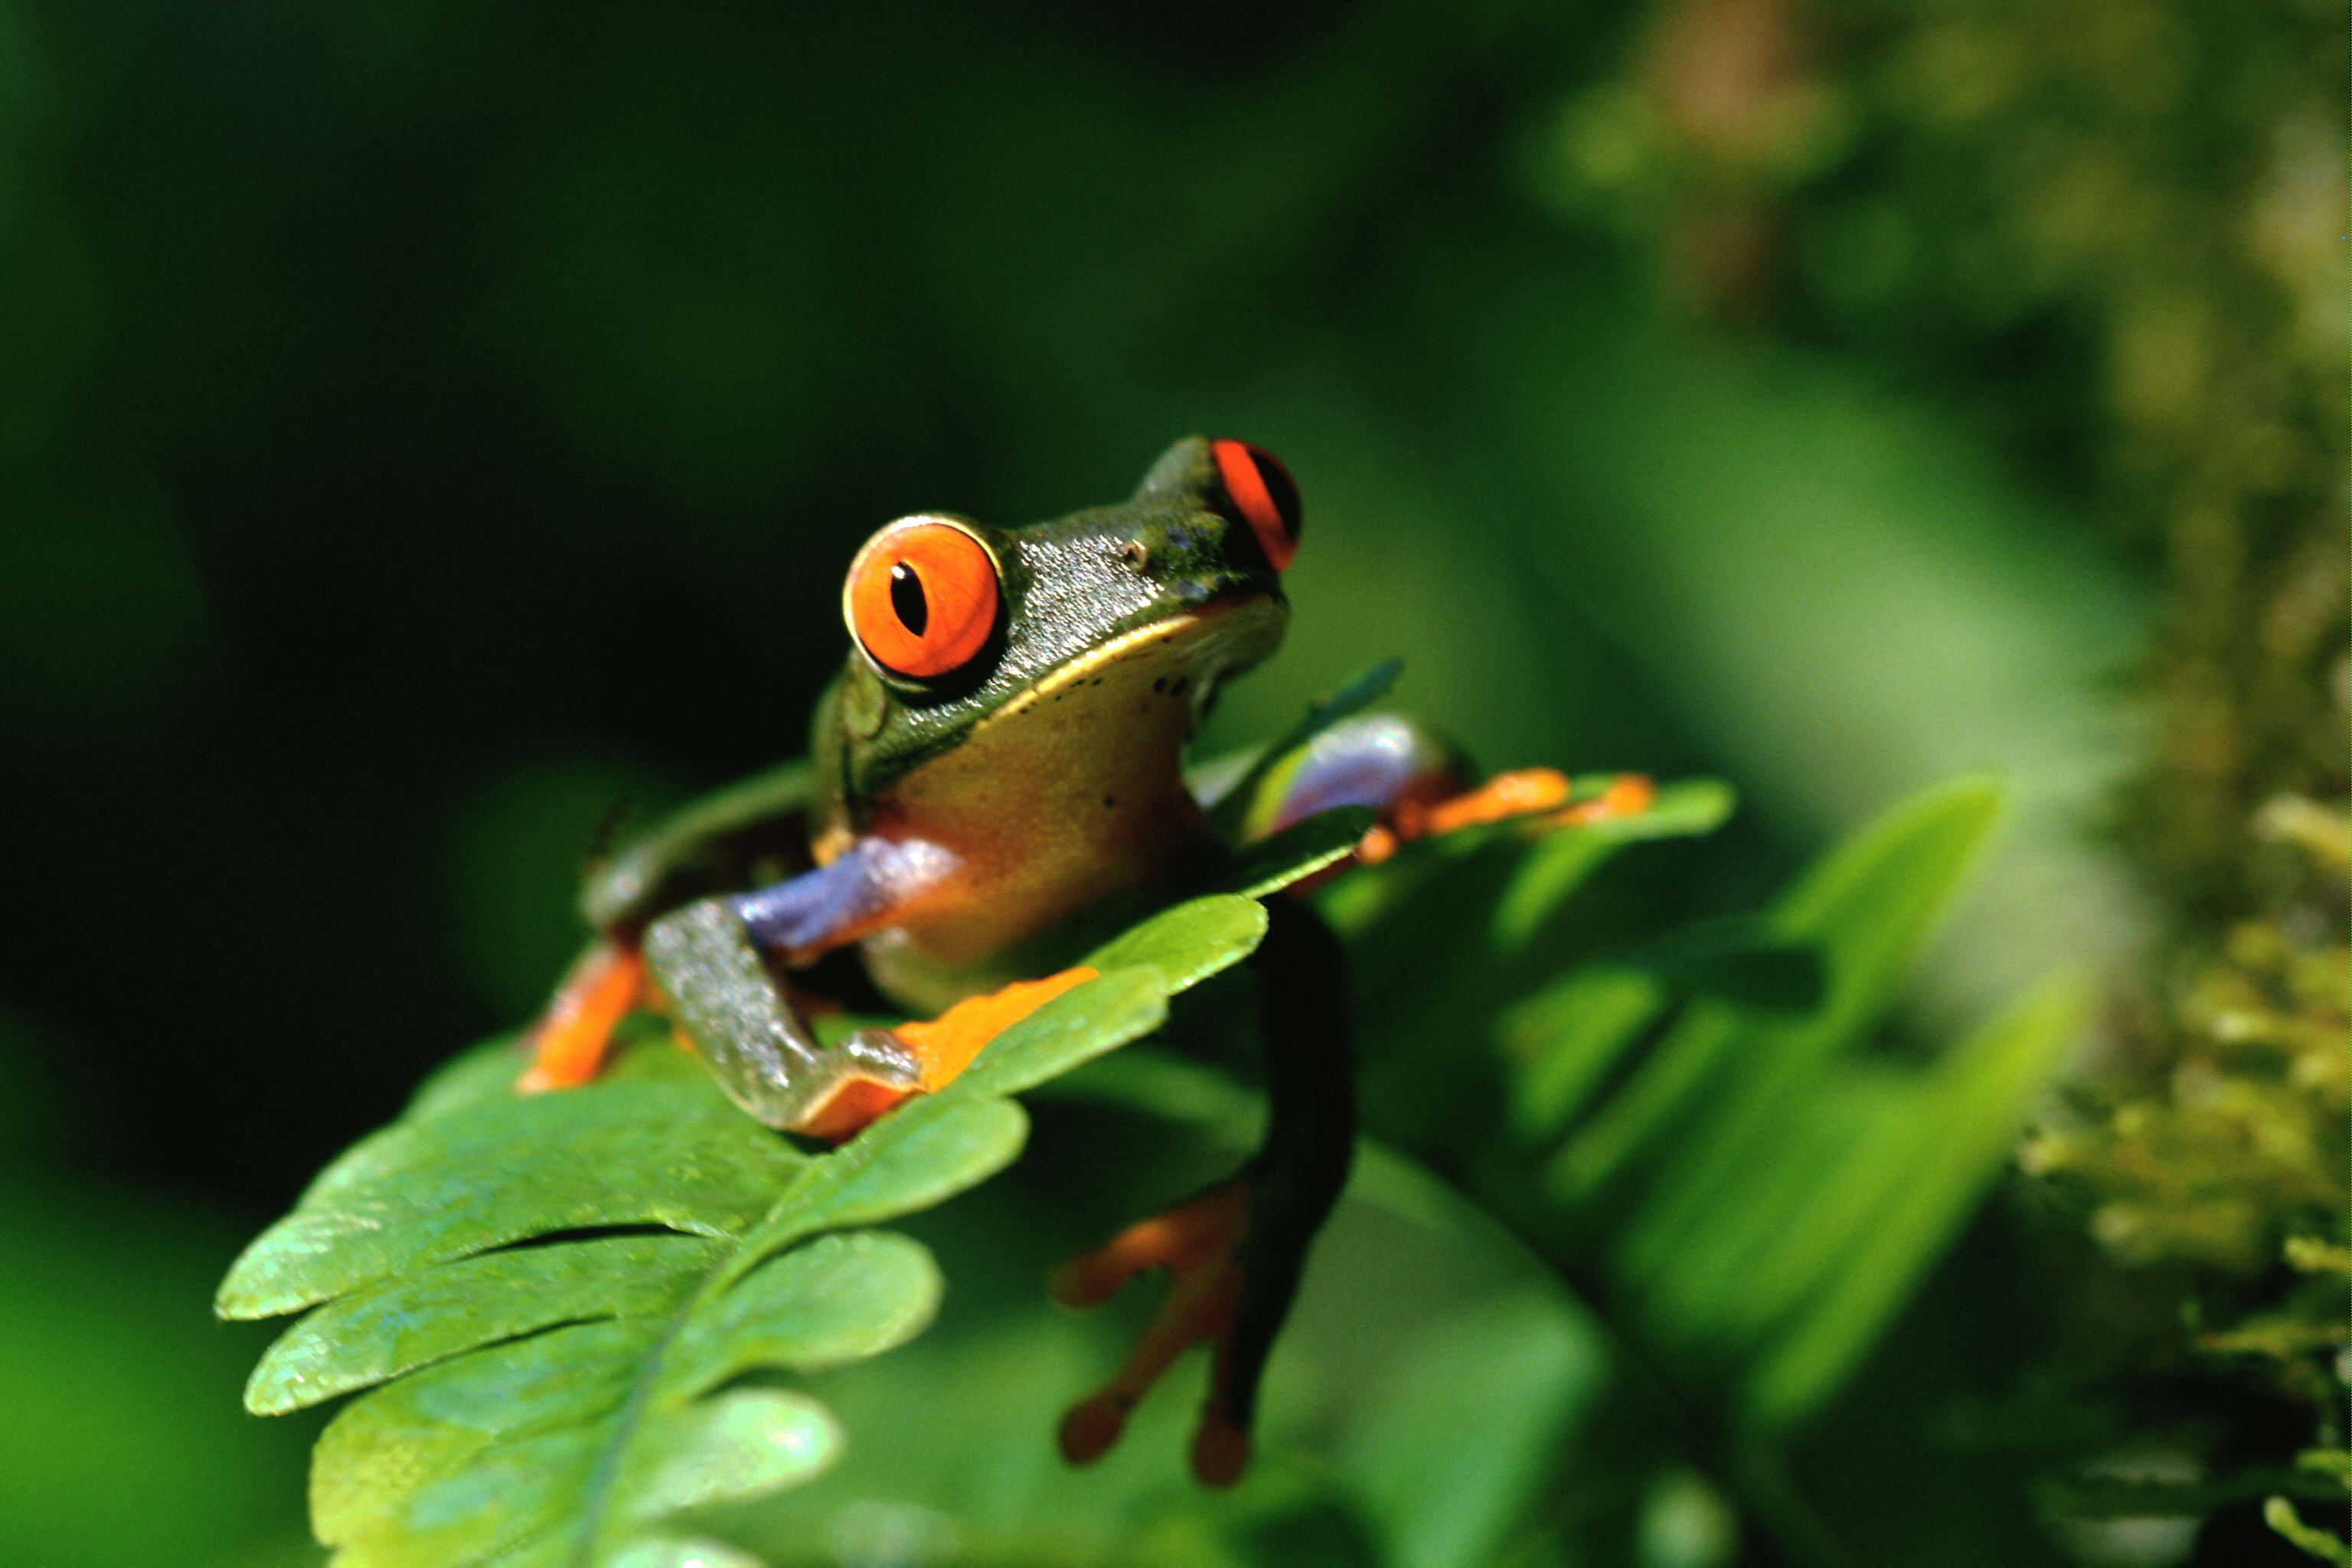 Red-eyed tree frog wallpapers, Colorful amphibian, Wallpaper collection, Animal photography, 3080x2050 HD Desktop